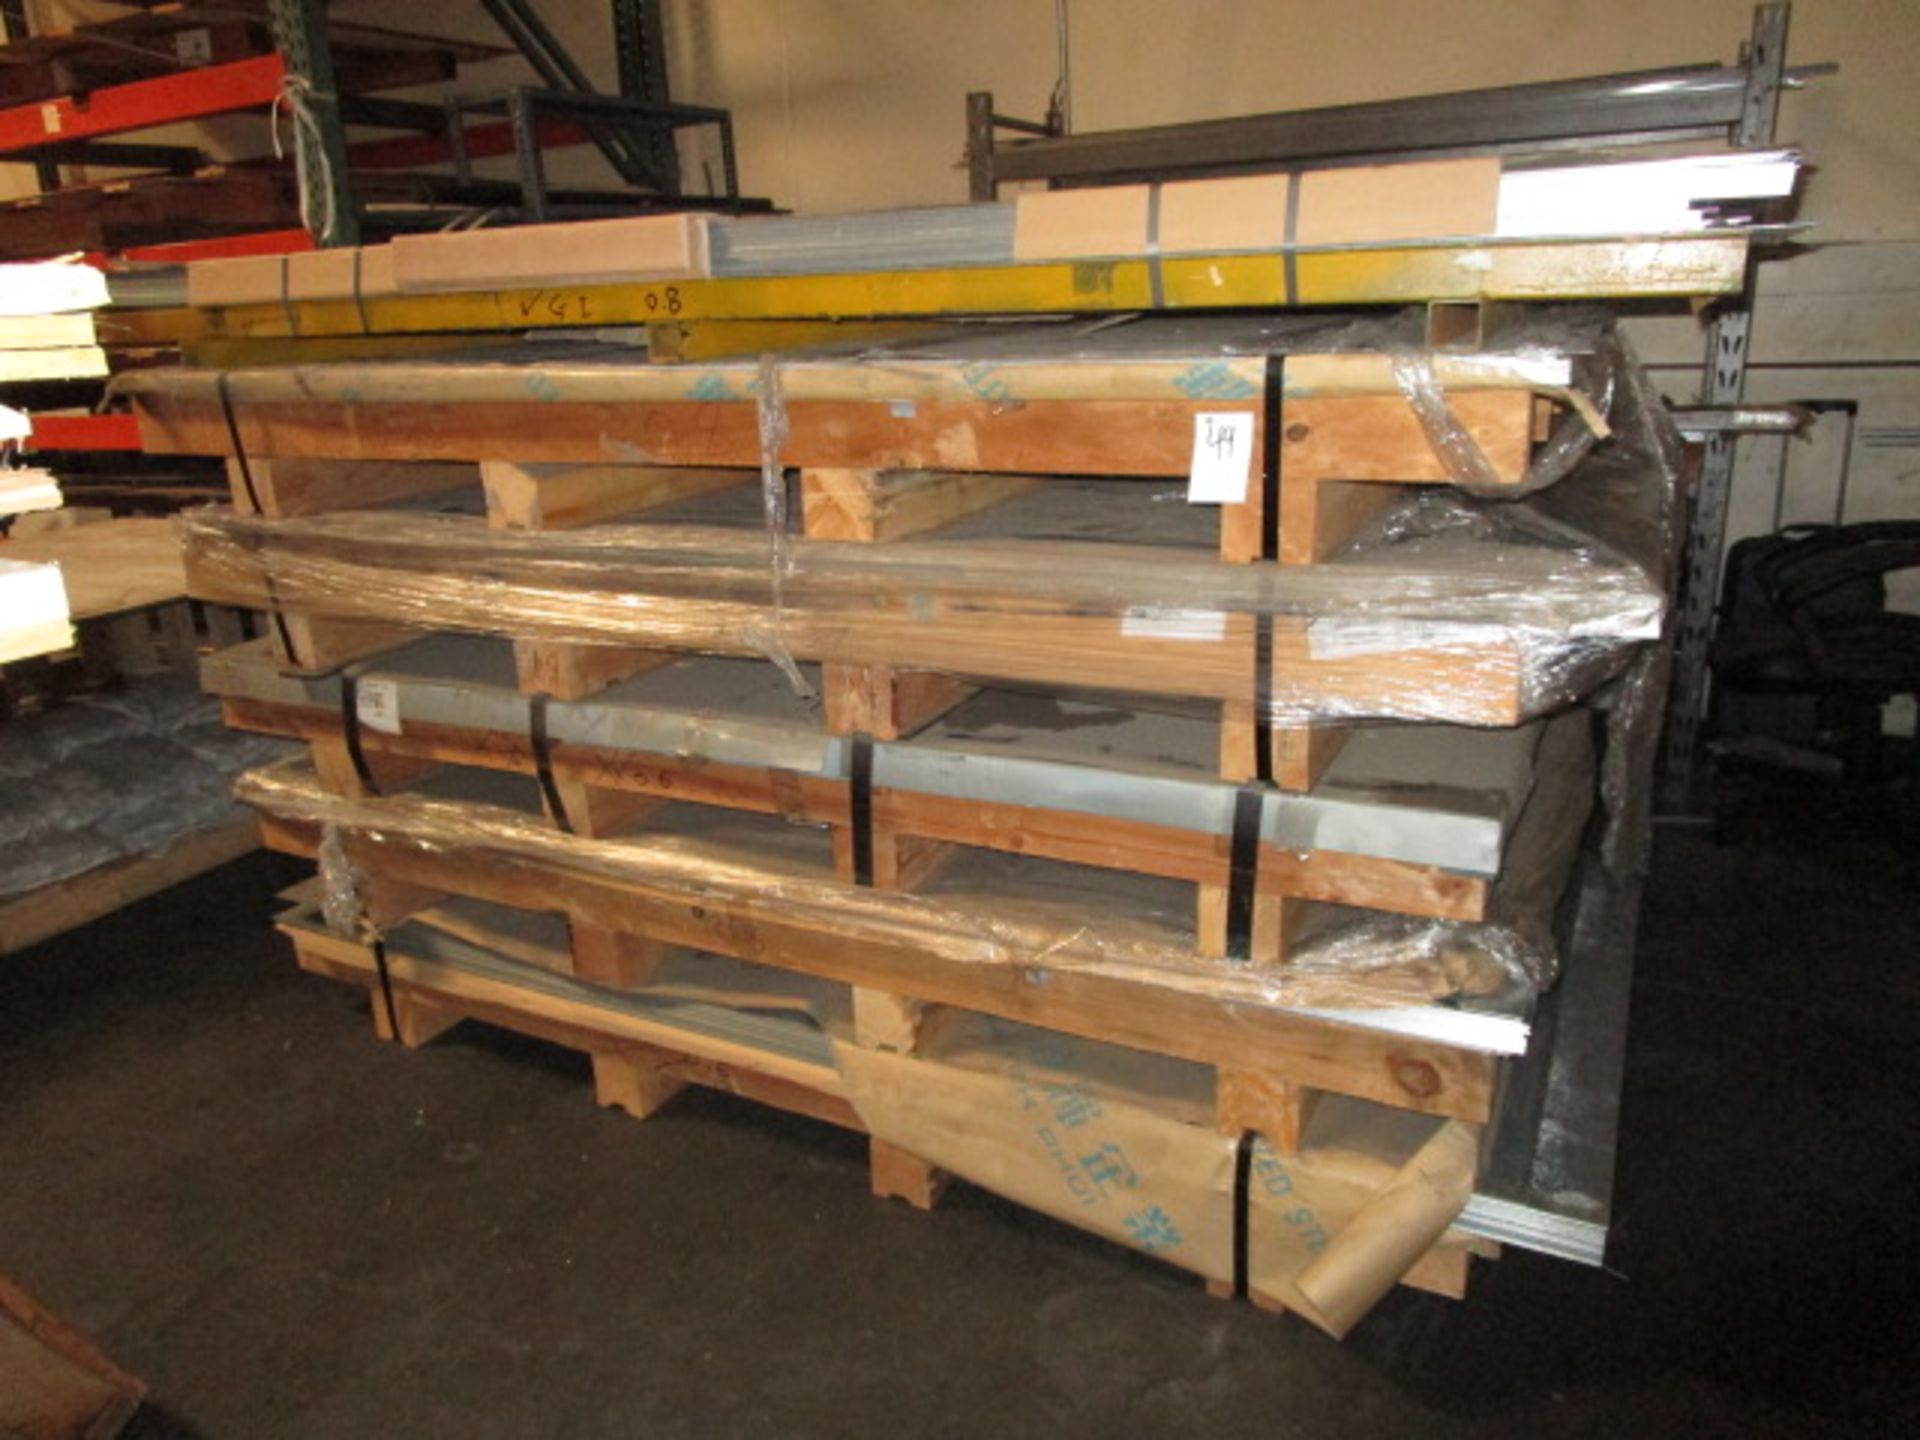 (6) Assorted Units of Sheet Metal: 4' x 8' - Thickness .8 & .6